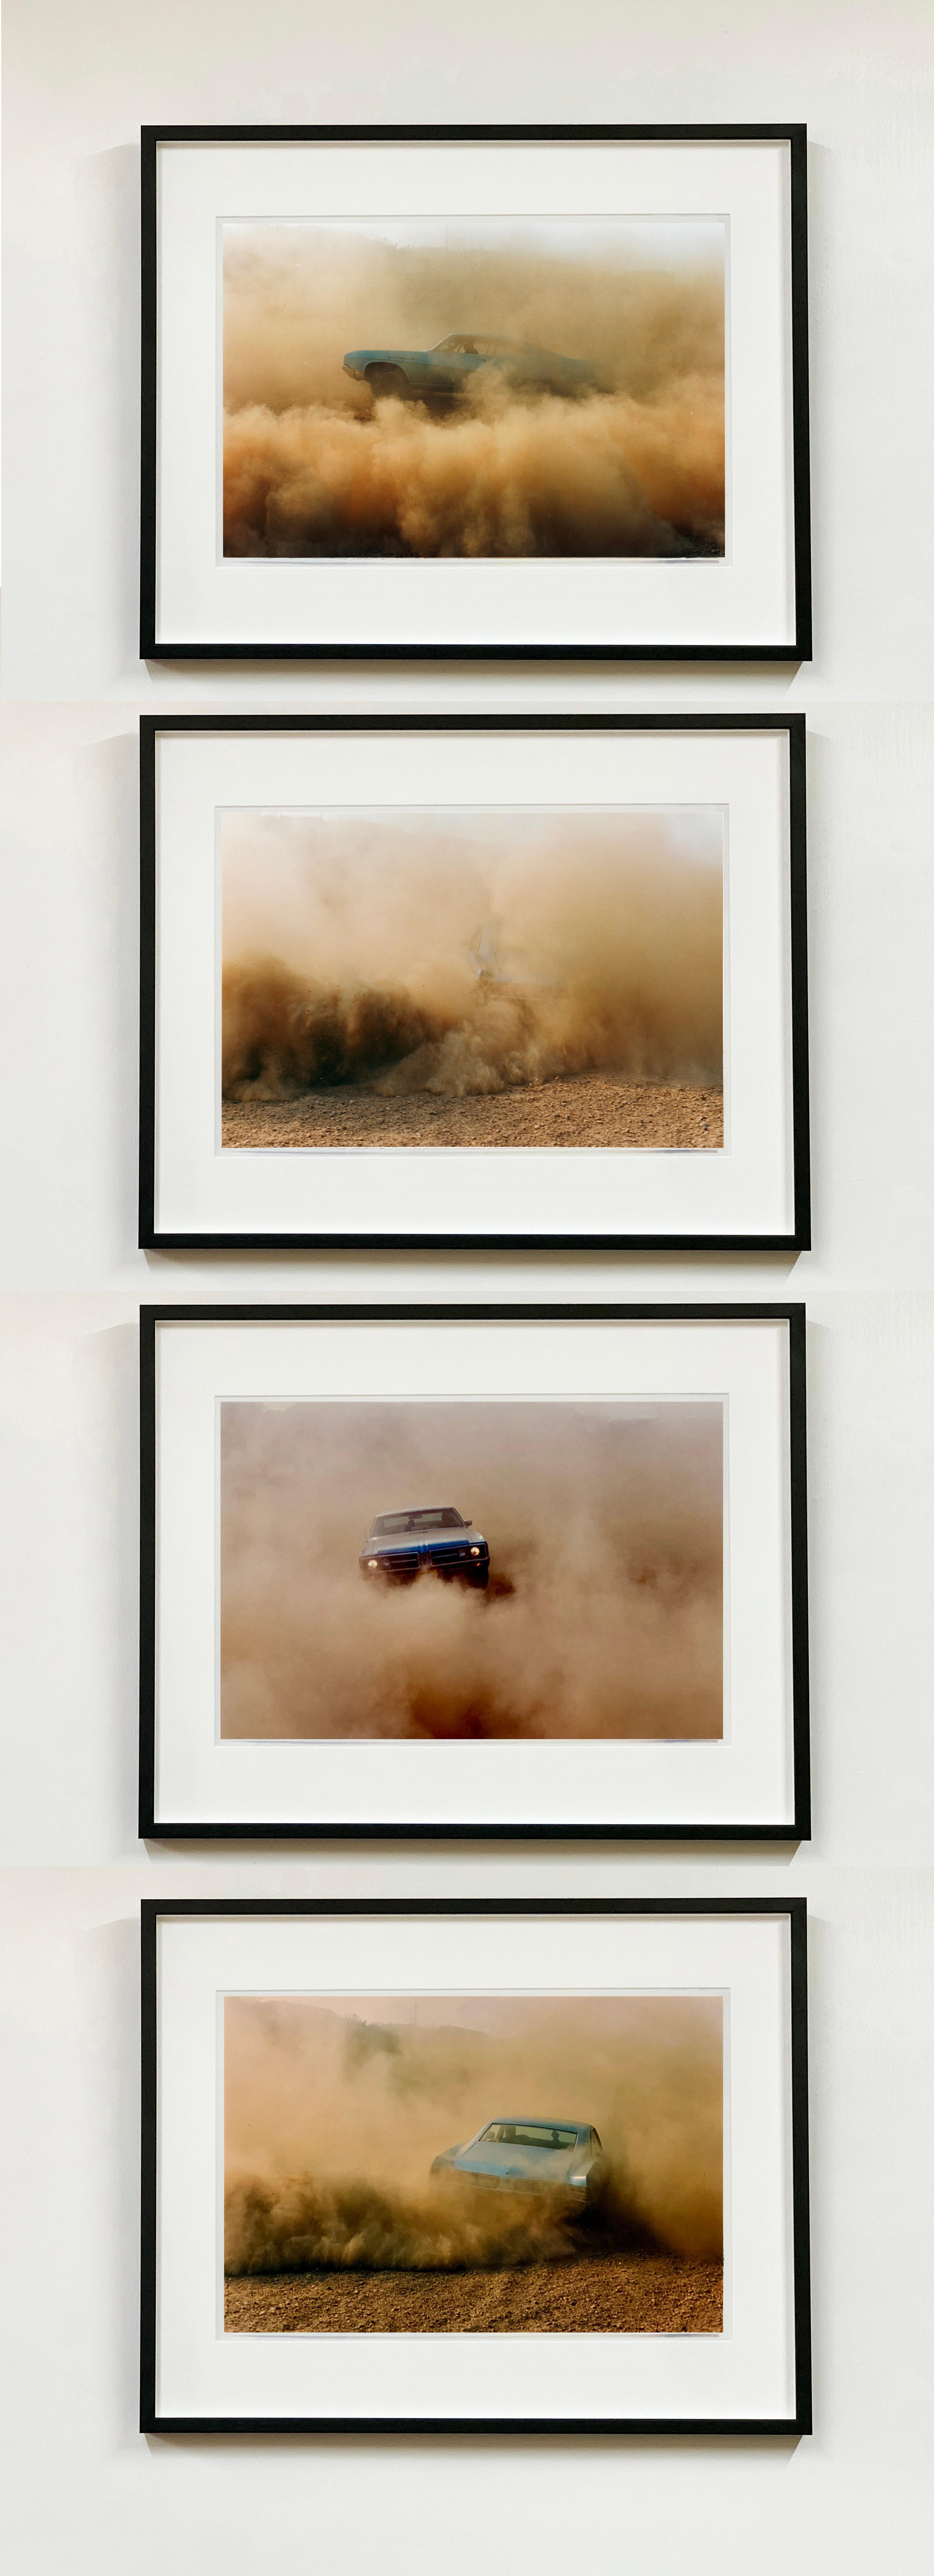 Buick in the Dust, Hemsby, Norfolk - Set of Four Framed Car Photographs For Sale 11